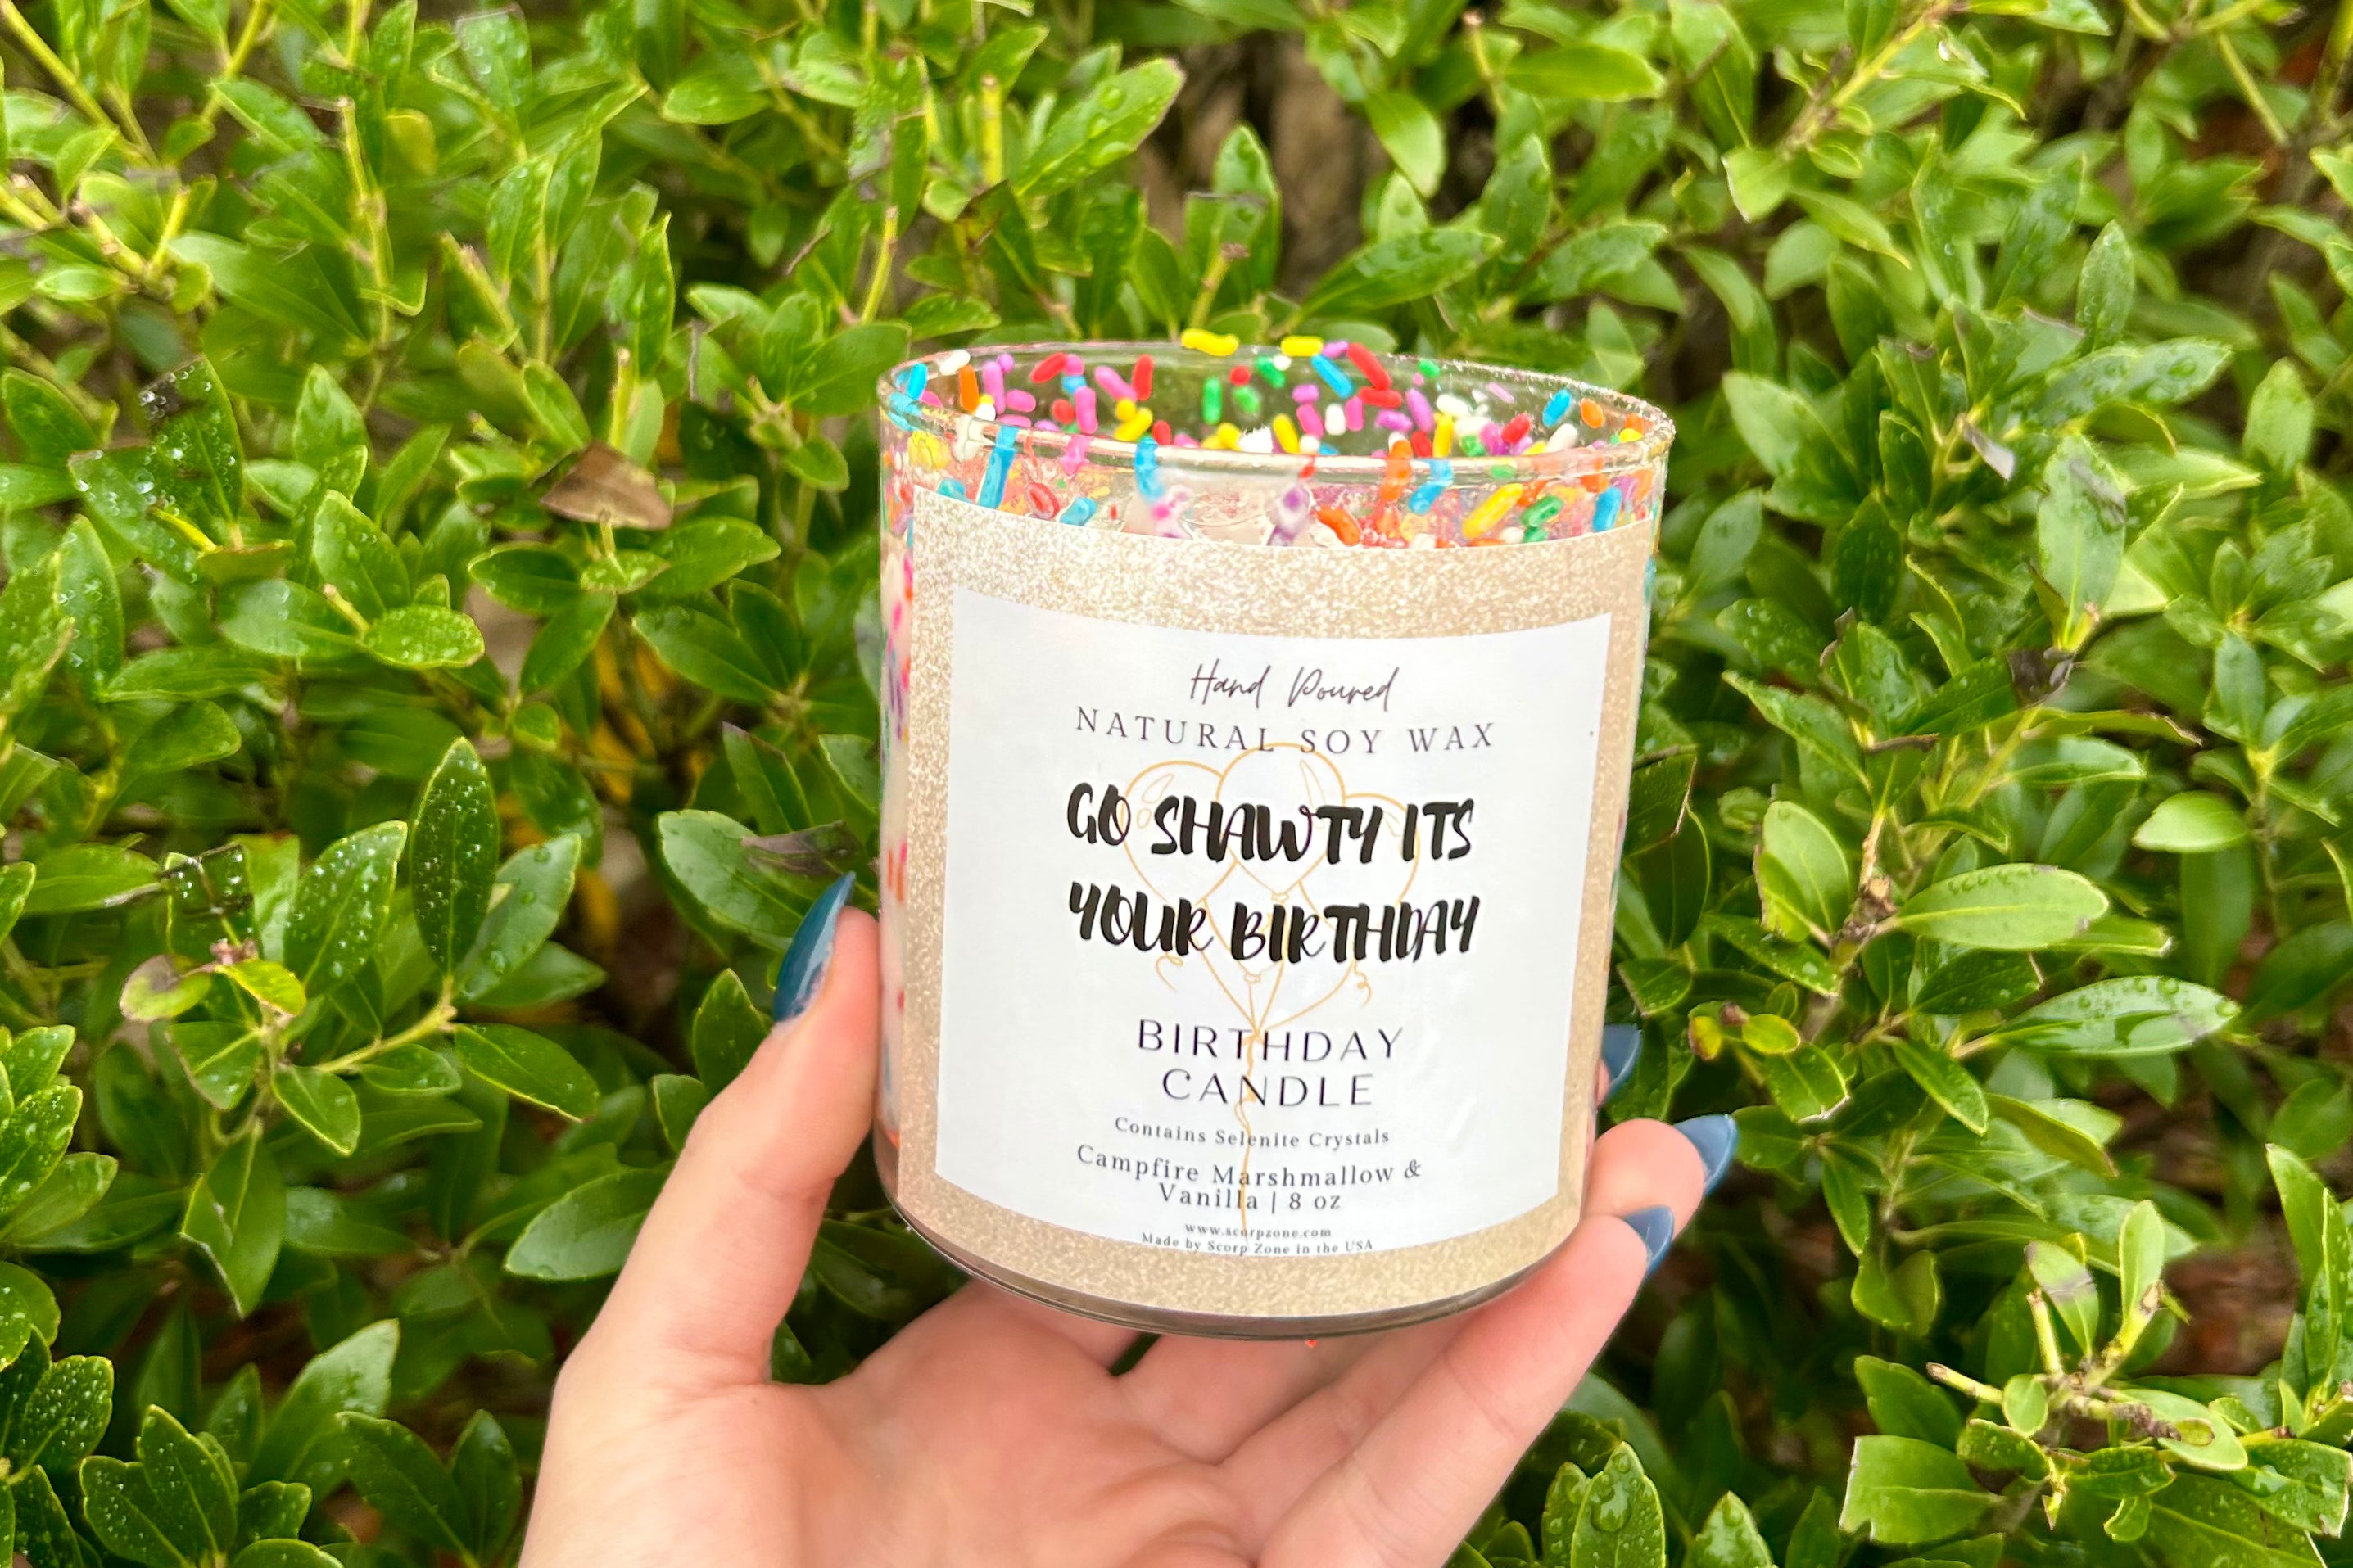 “Go Shawty It’s Your Birthday” Crystal Soy Wax Candle by Scorp Zone